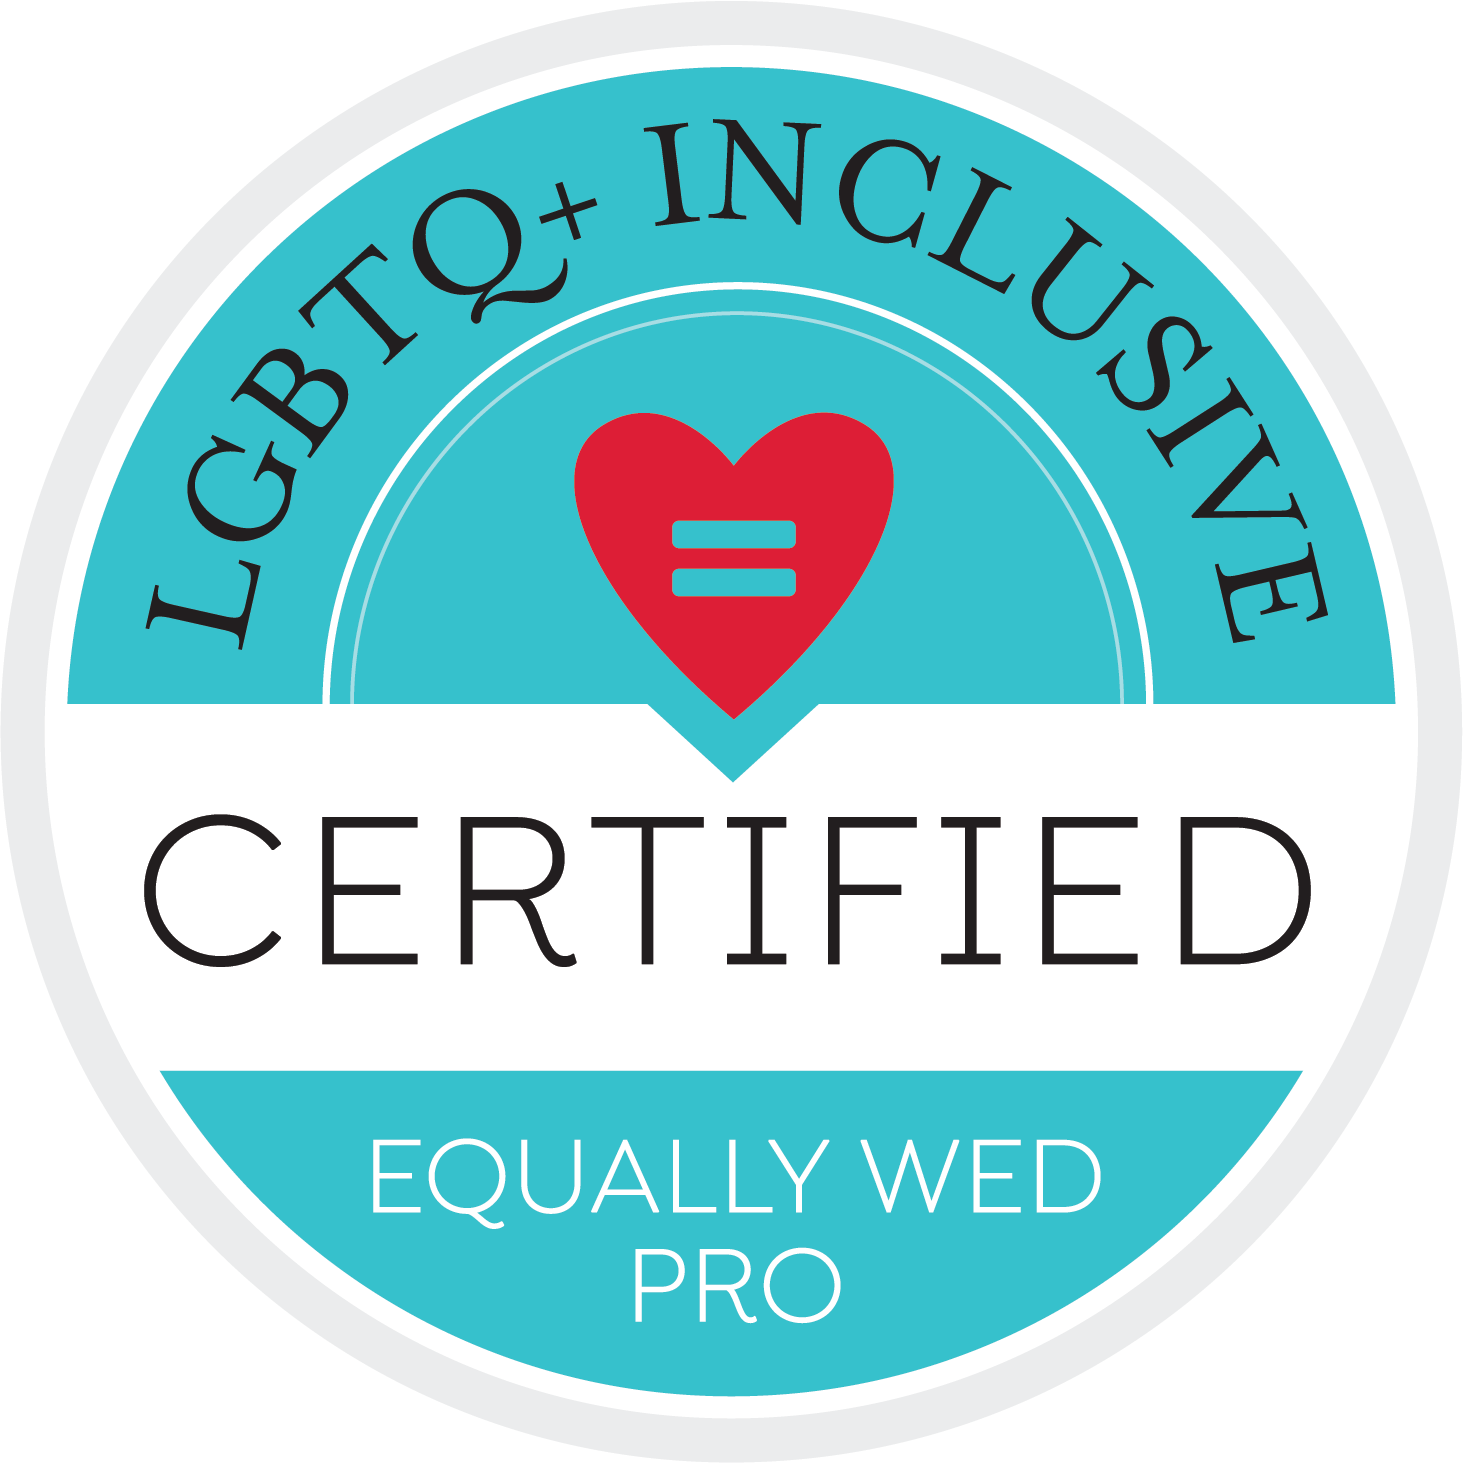 zPxR9xG8SNaZR3bv2H2R_Equally-Wed-Pro-LGBTQ-Inclusive-Certified-Badge.png